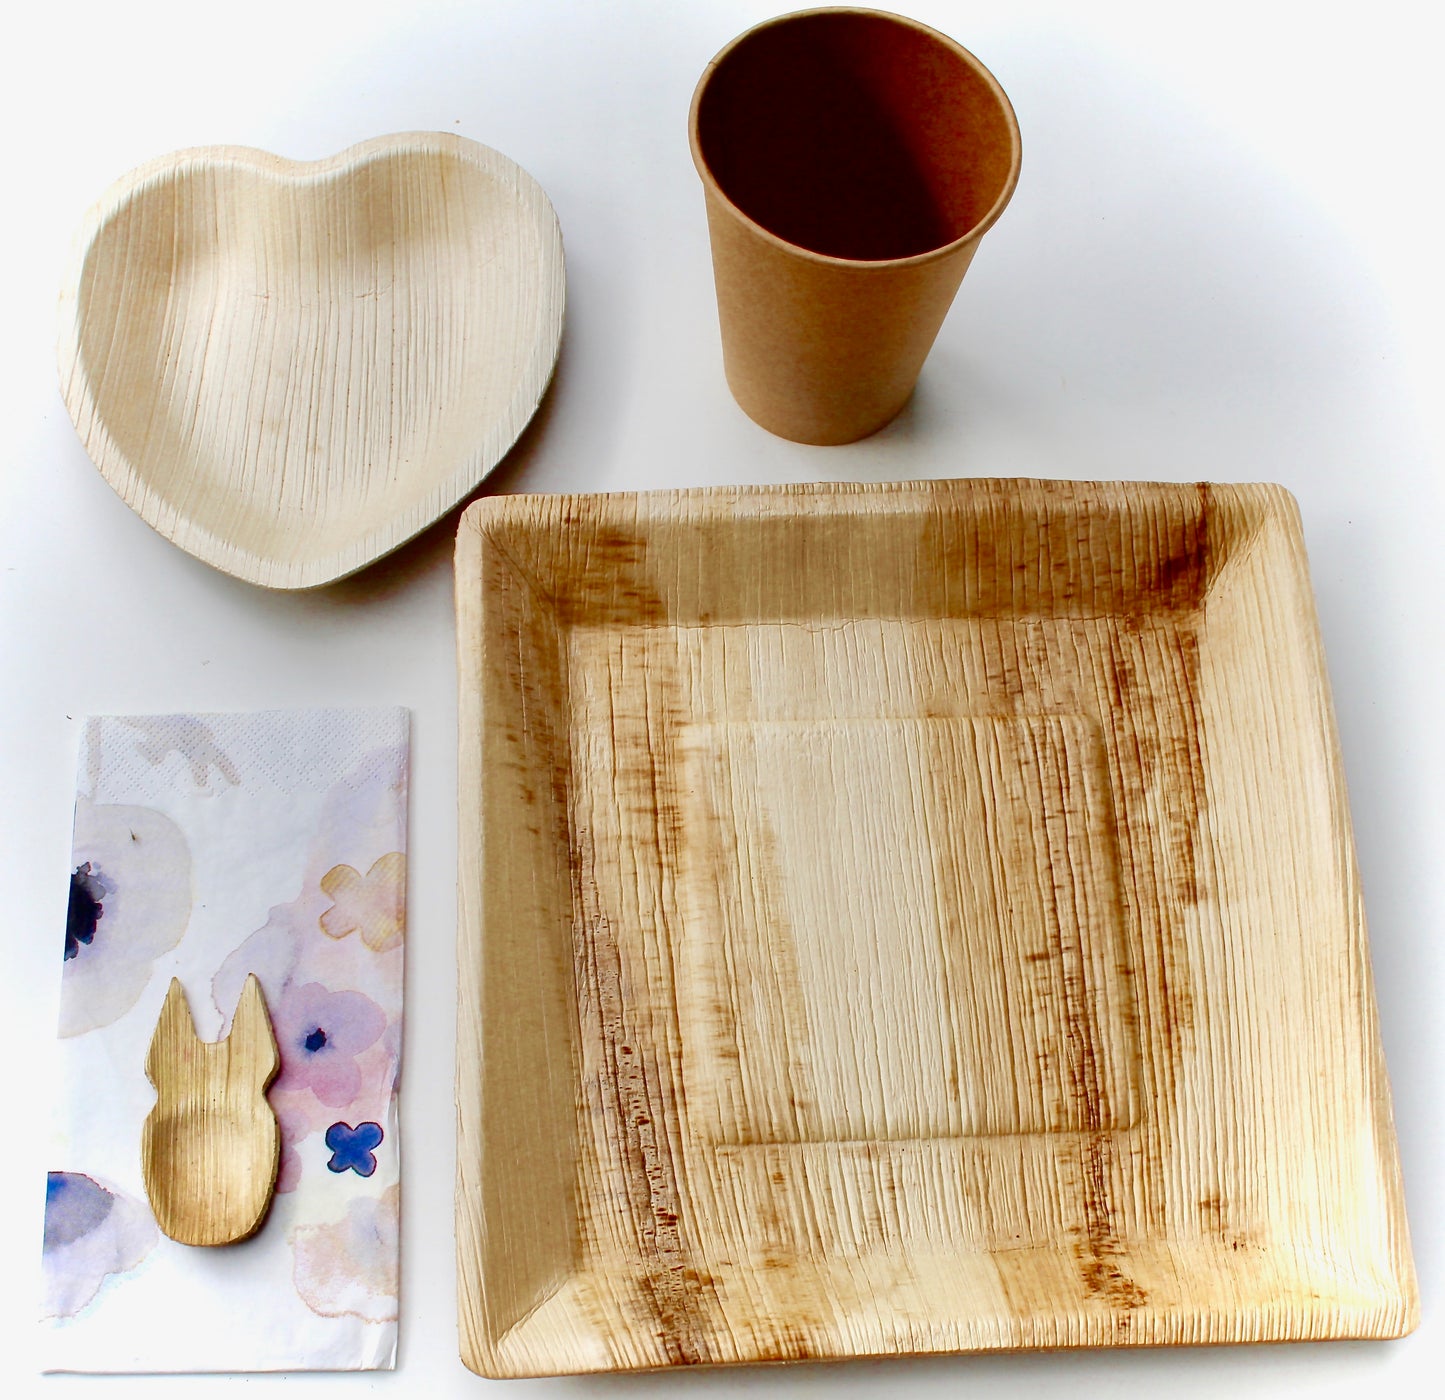 Palm Leaf plates 10 Pice 10" Square Deep   - 10 pic 6" Heart 6"  - 30 Pic cutlery - 10 pic 5" Bowl  and 10 pic Coup - 20 pic Napkin